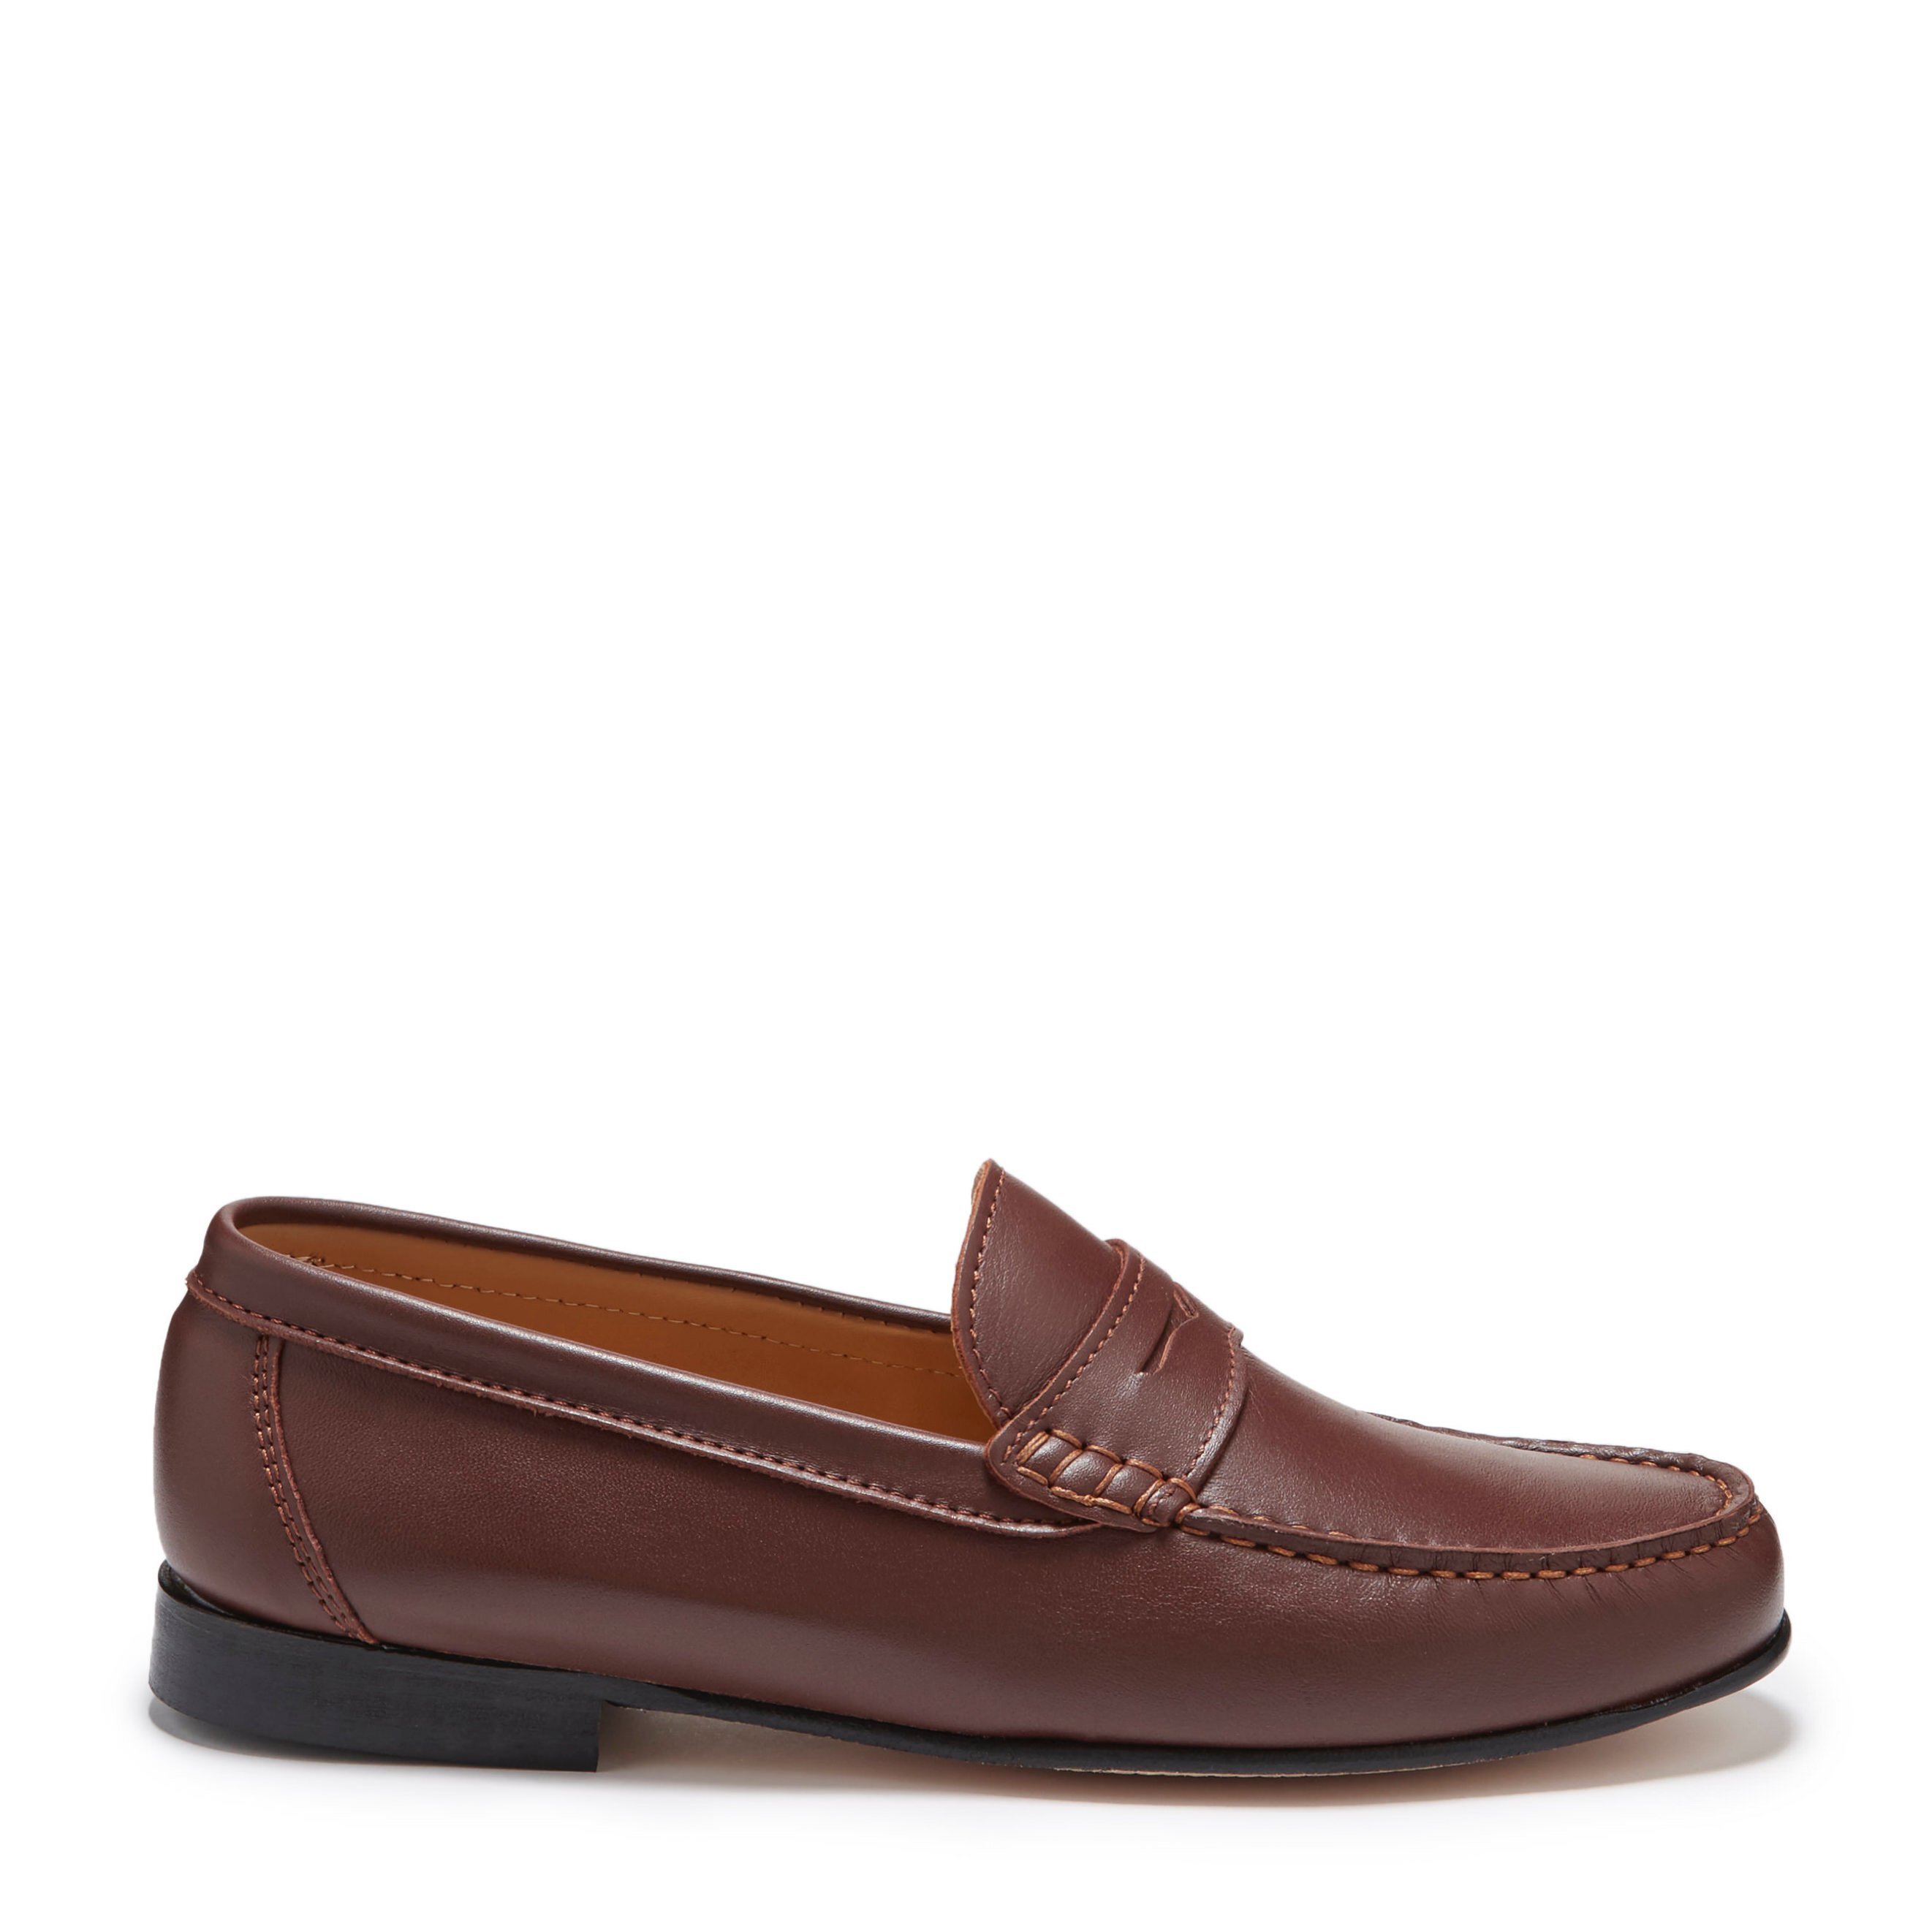 Hugs & Co Mens penny loafers brown leather - Harvey Nichols